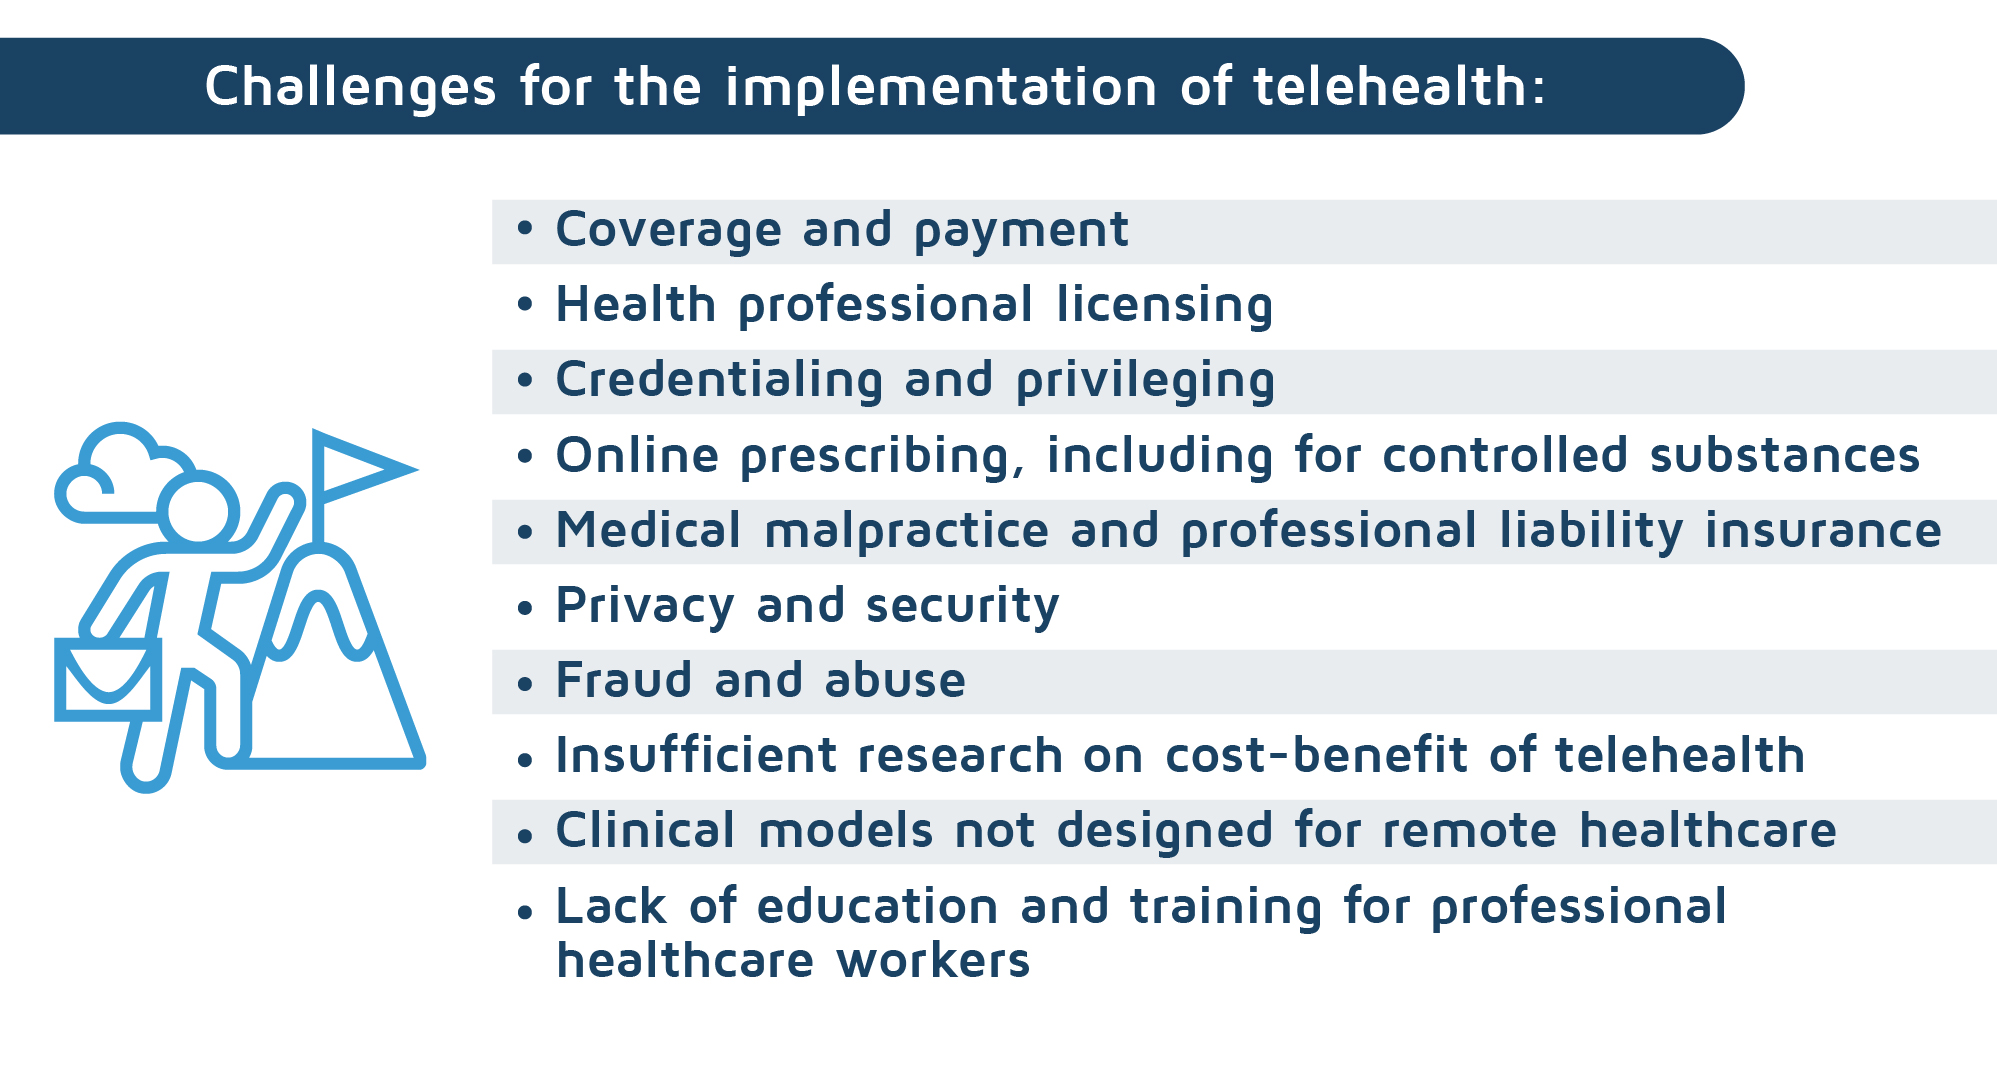 Challenges for the implementation of telehealth